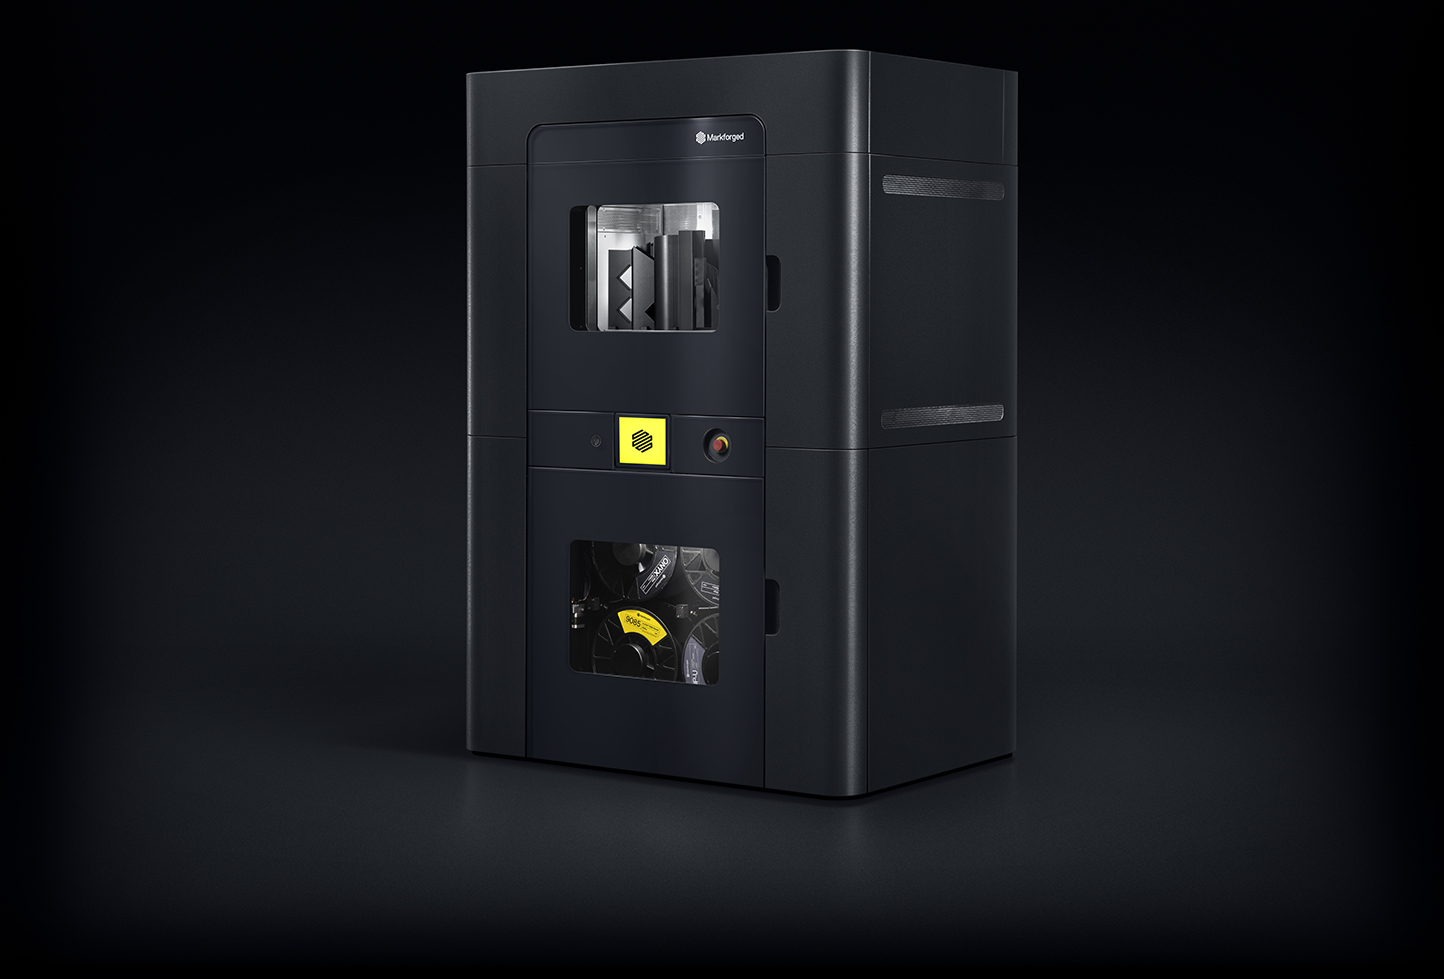 The FX20 includes a heated build chamber capable of maintaining up to a 200°C temperature.